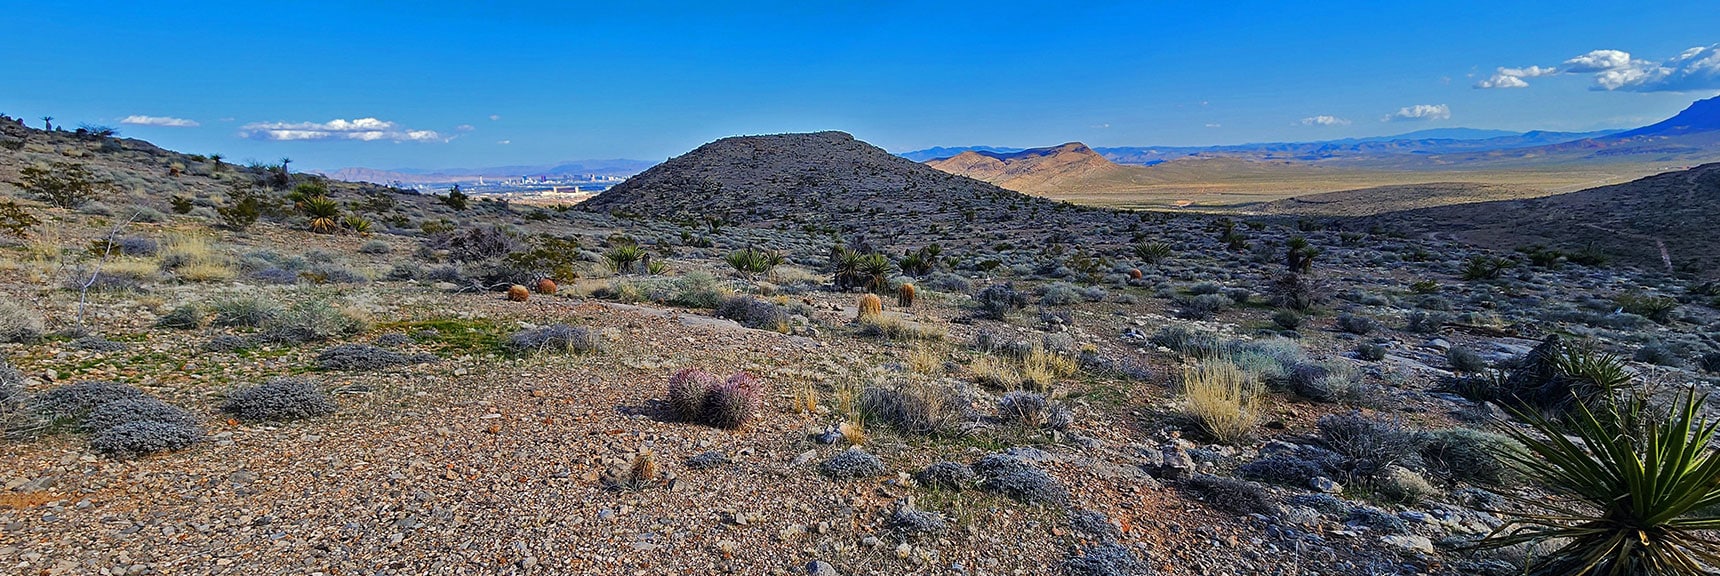 The Lower Saddle is at the Base of the Hill Ahead. | Gray Cap Ridge Southeast Summit | La Madre Mountains Wilderness, Nevada